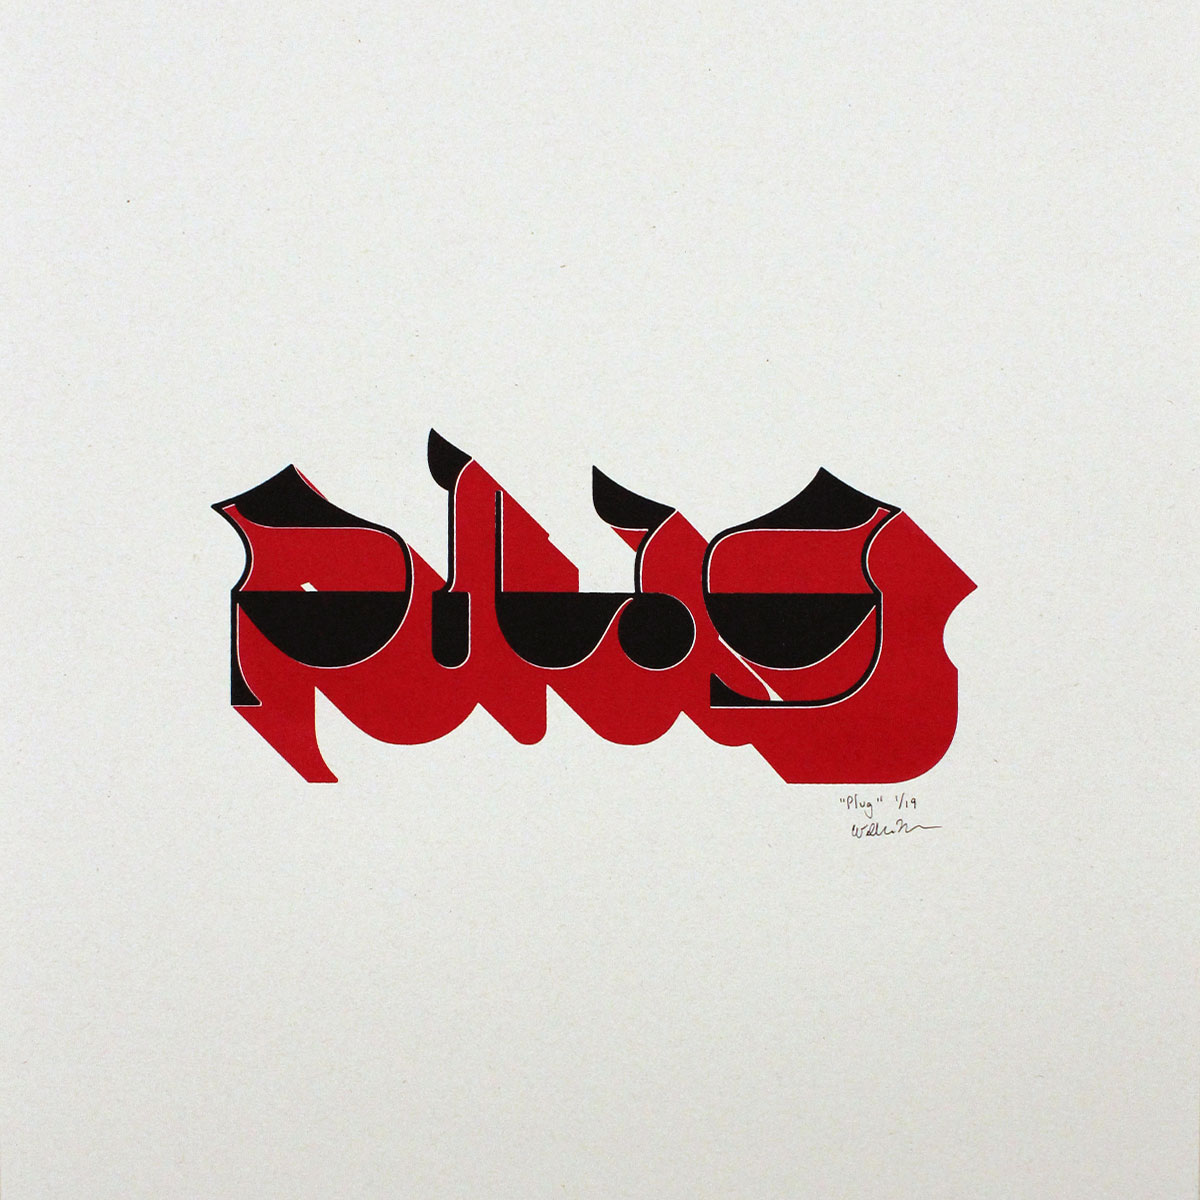 Screen printed poster of the word ‘plug’ to show typeface in context